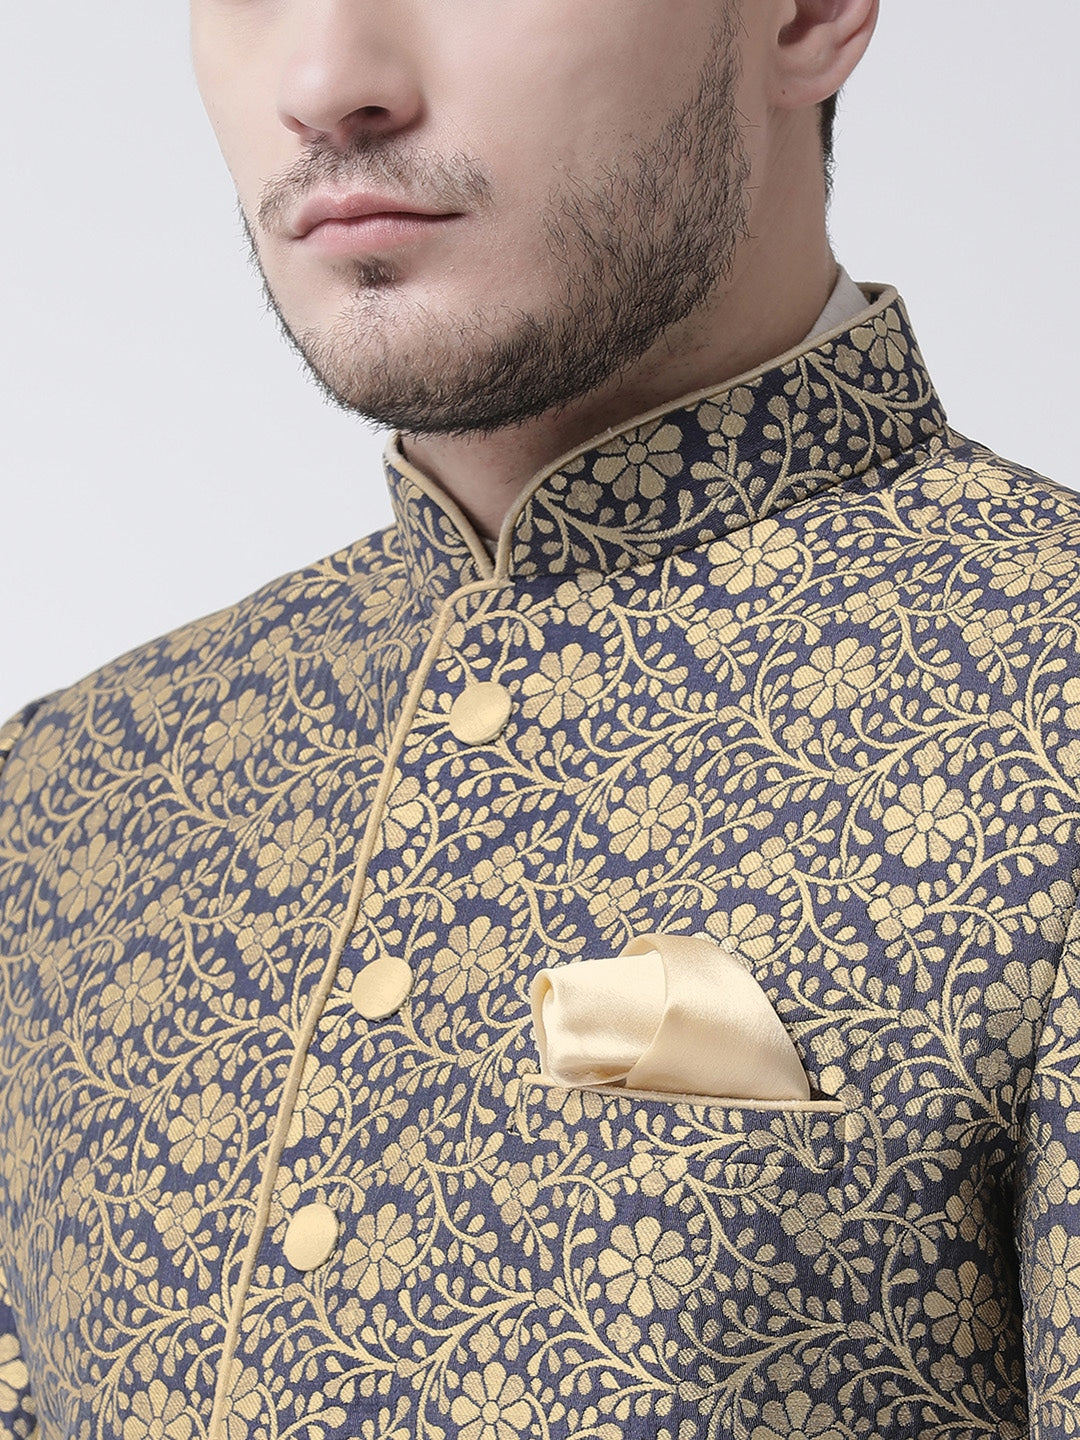 Navy Floral Woven Sherwani Indian Clothing in Denver, CO, Aurora, CO, Boulder, CO, Fort Collins, CO, Colorado Springs, CO, Parker, CO, Highlands Ranch, CO, Cherry Creek, CO, Centennial, CO, and Longmont, CO. NATIONWIDE SHIPPING USA- India Fashion X